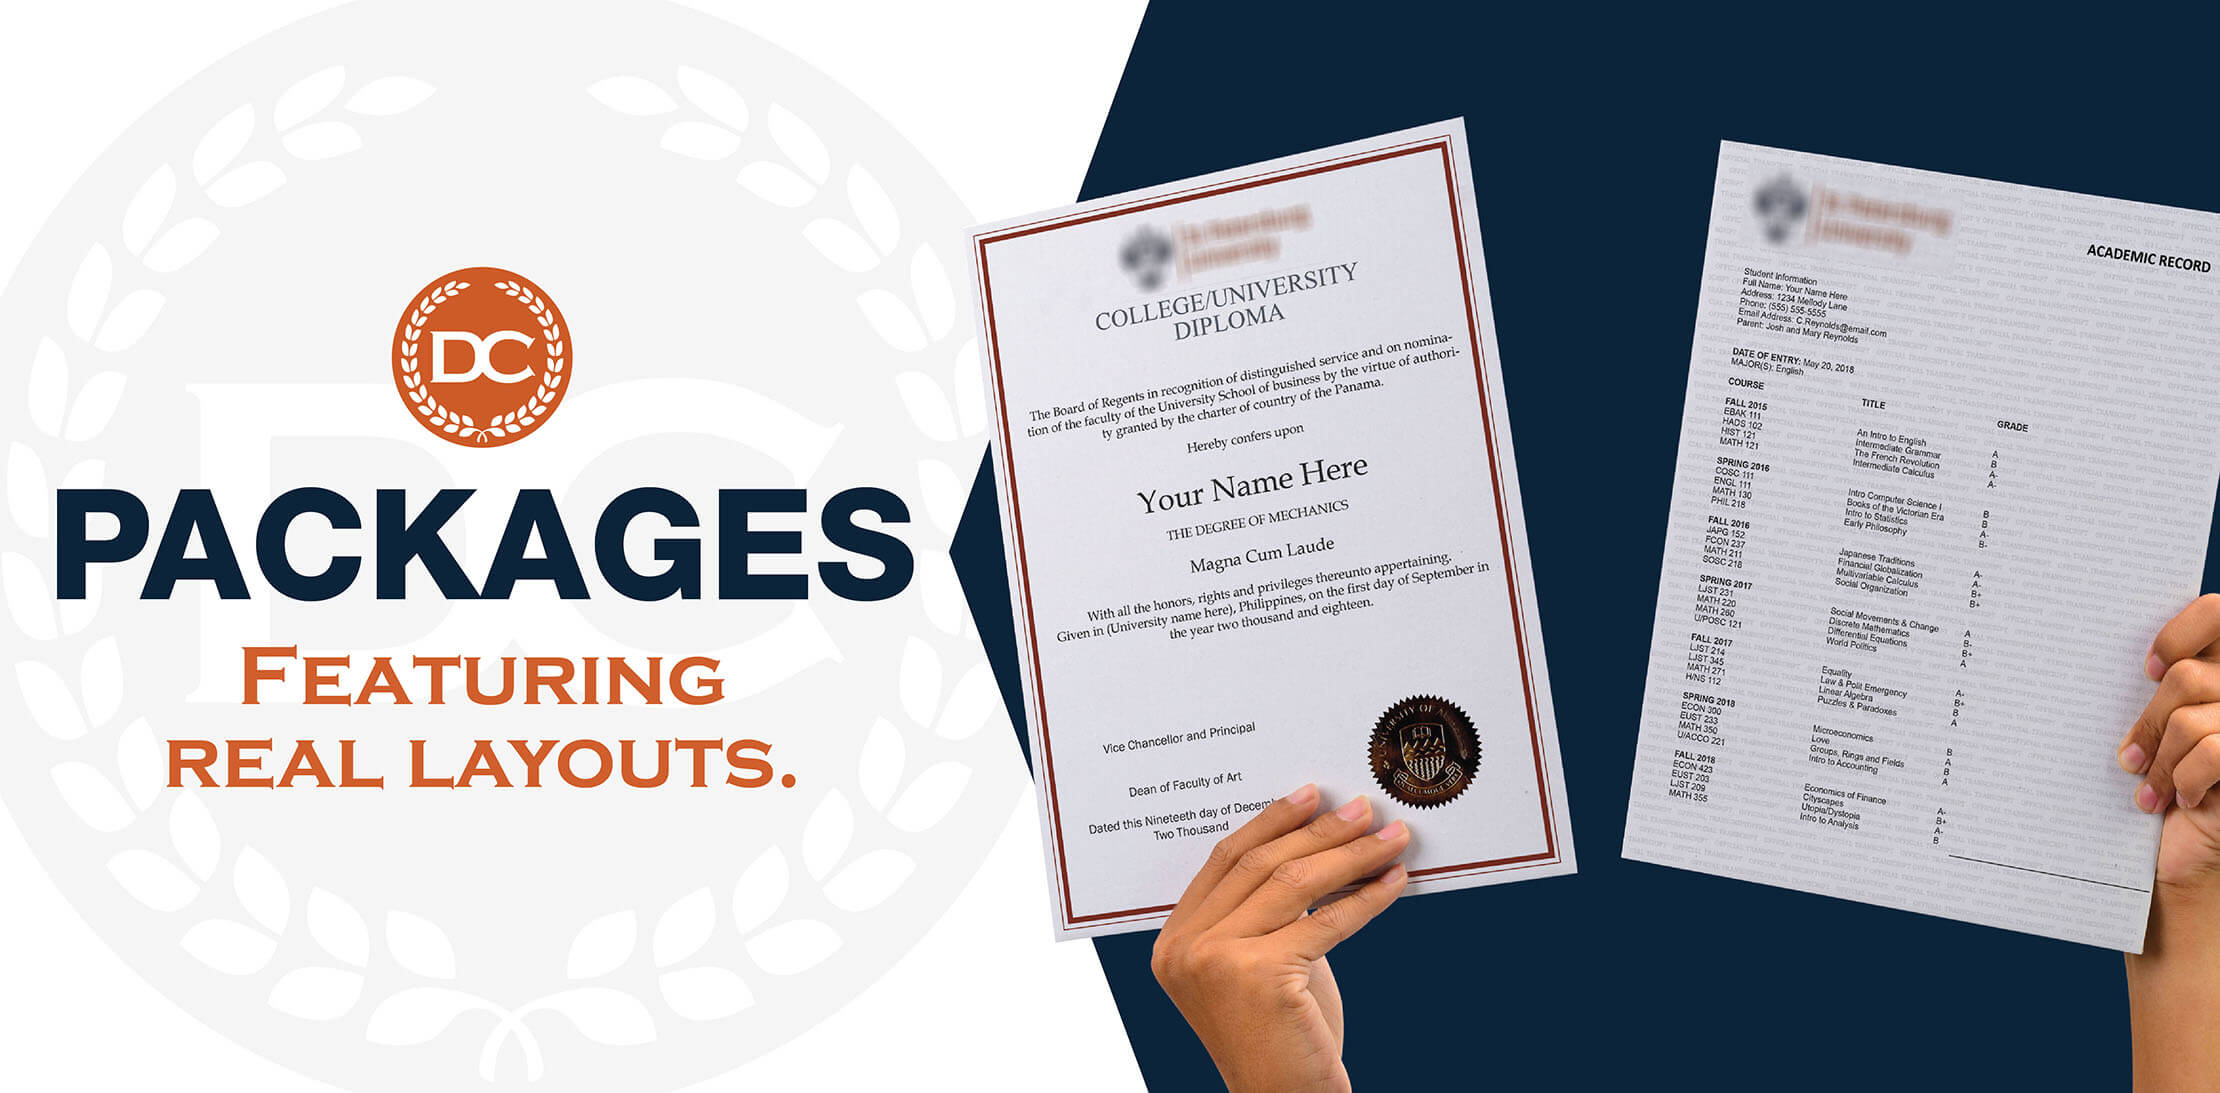 Buy fake diploma and transcript packages! Real custom made raised and embossed seals! Trust Diploma Company today with it's unmatched warranty guarantee. Arrives fast and proofed free. 
